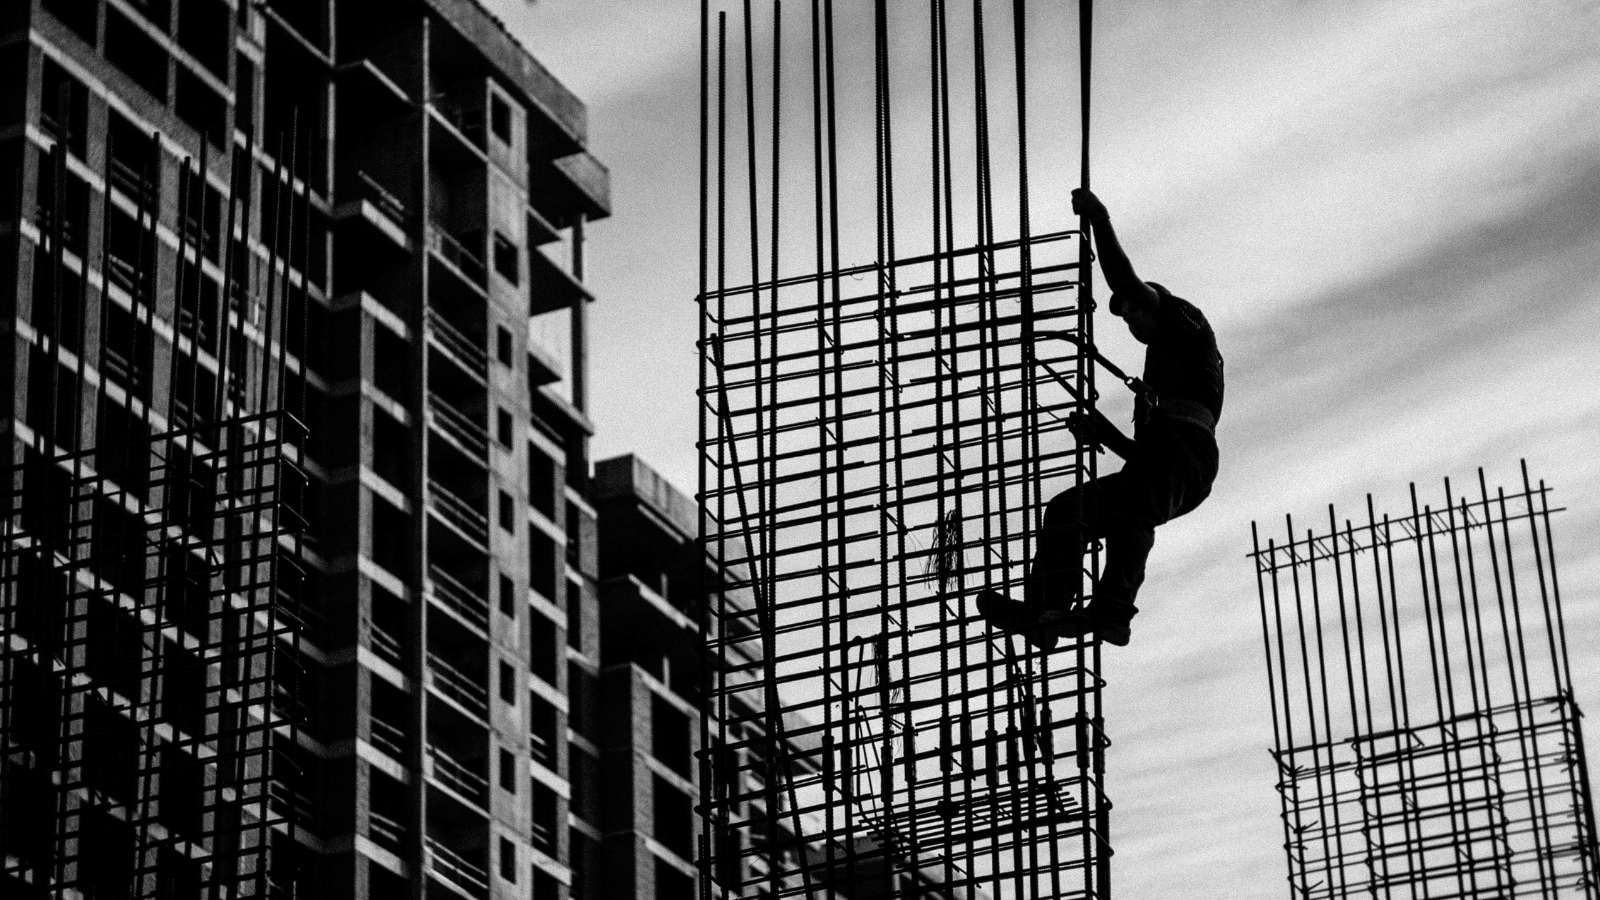 Construction worker on site